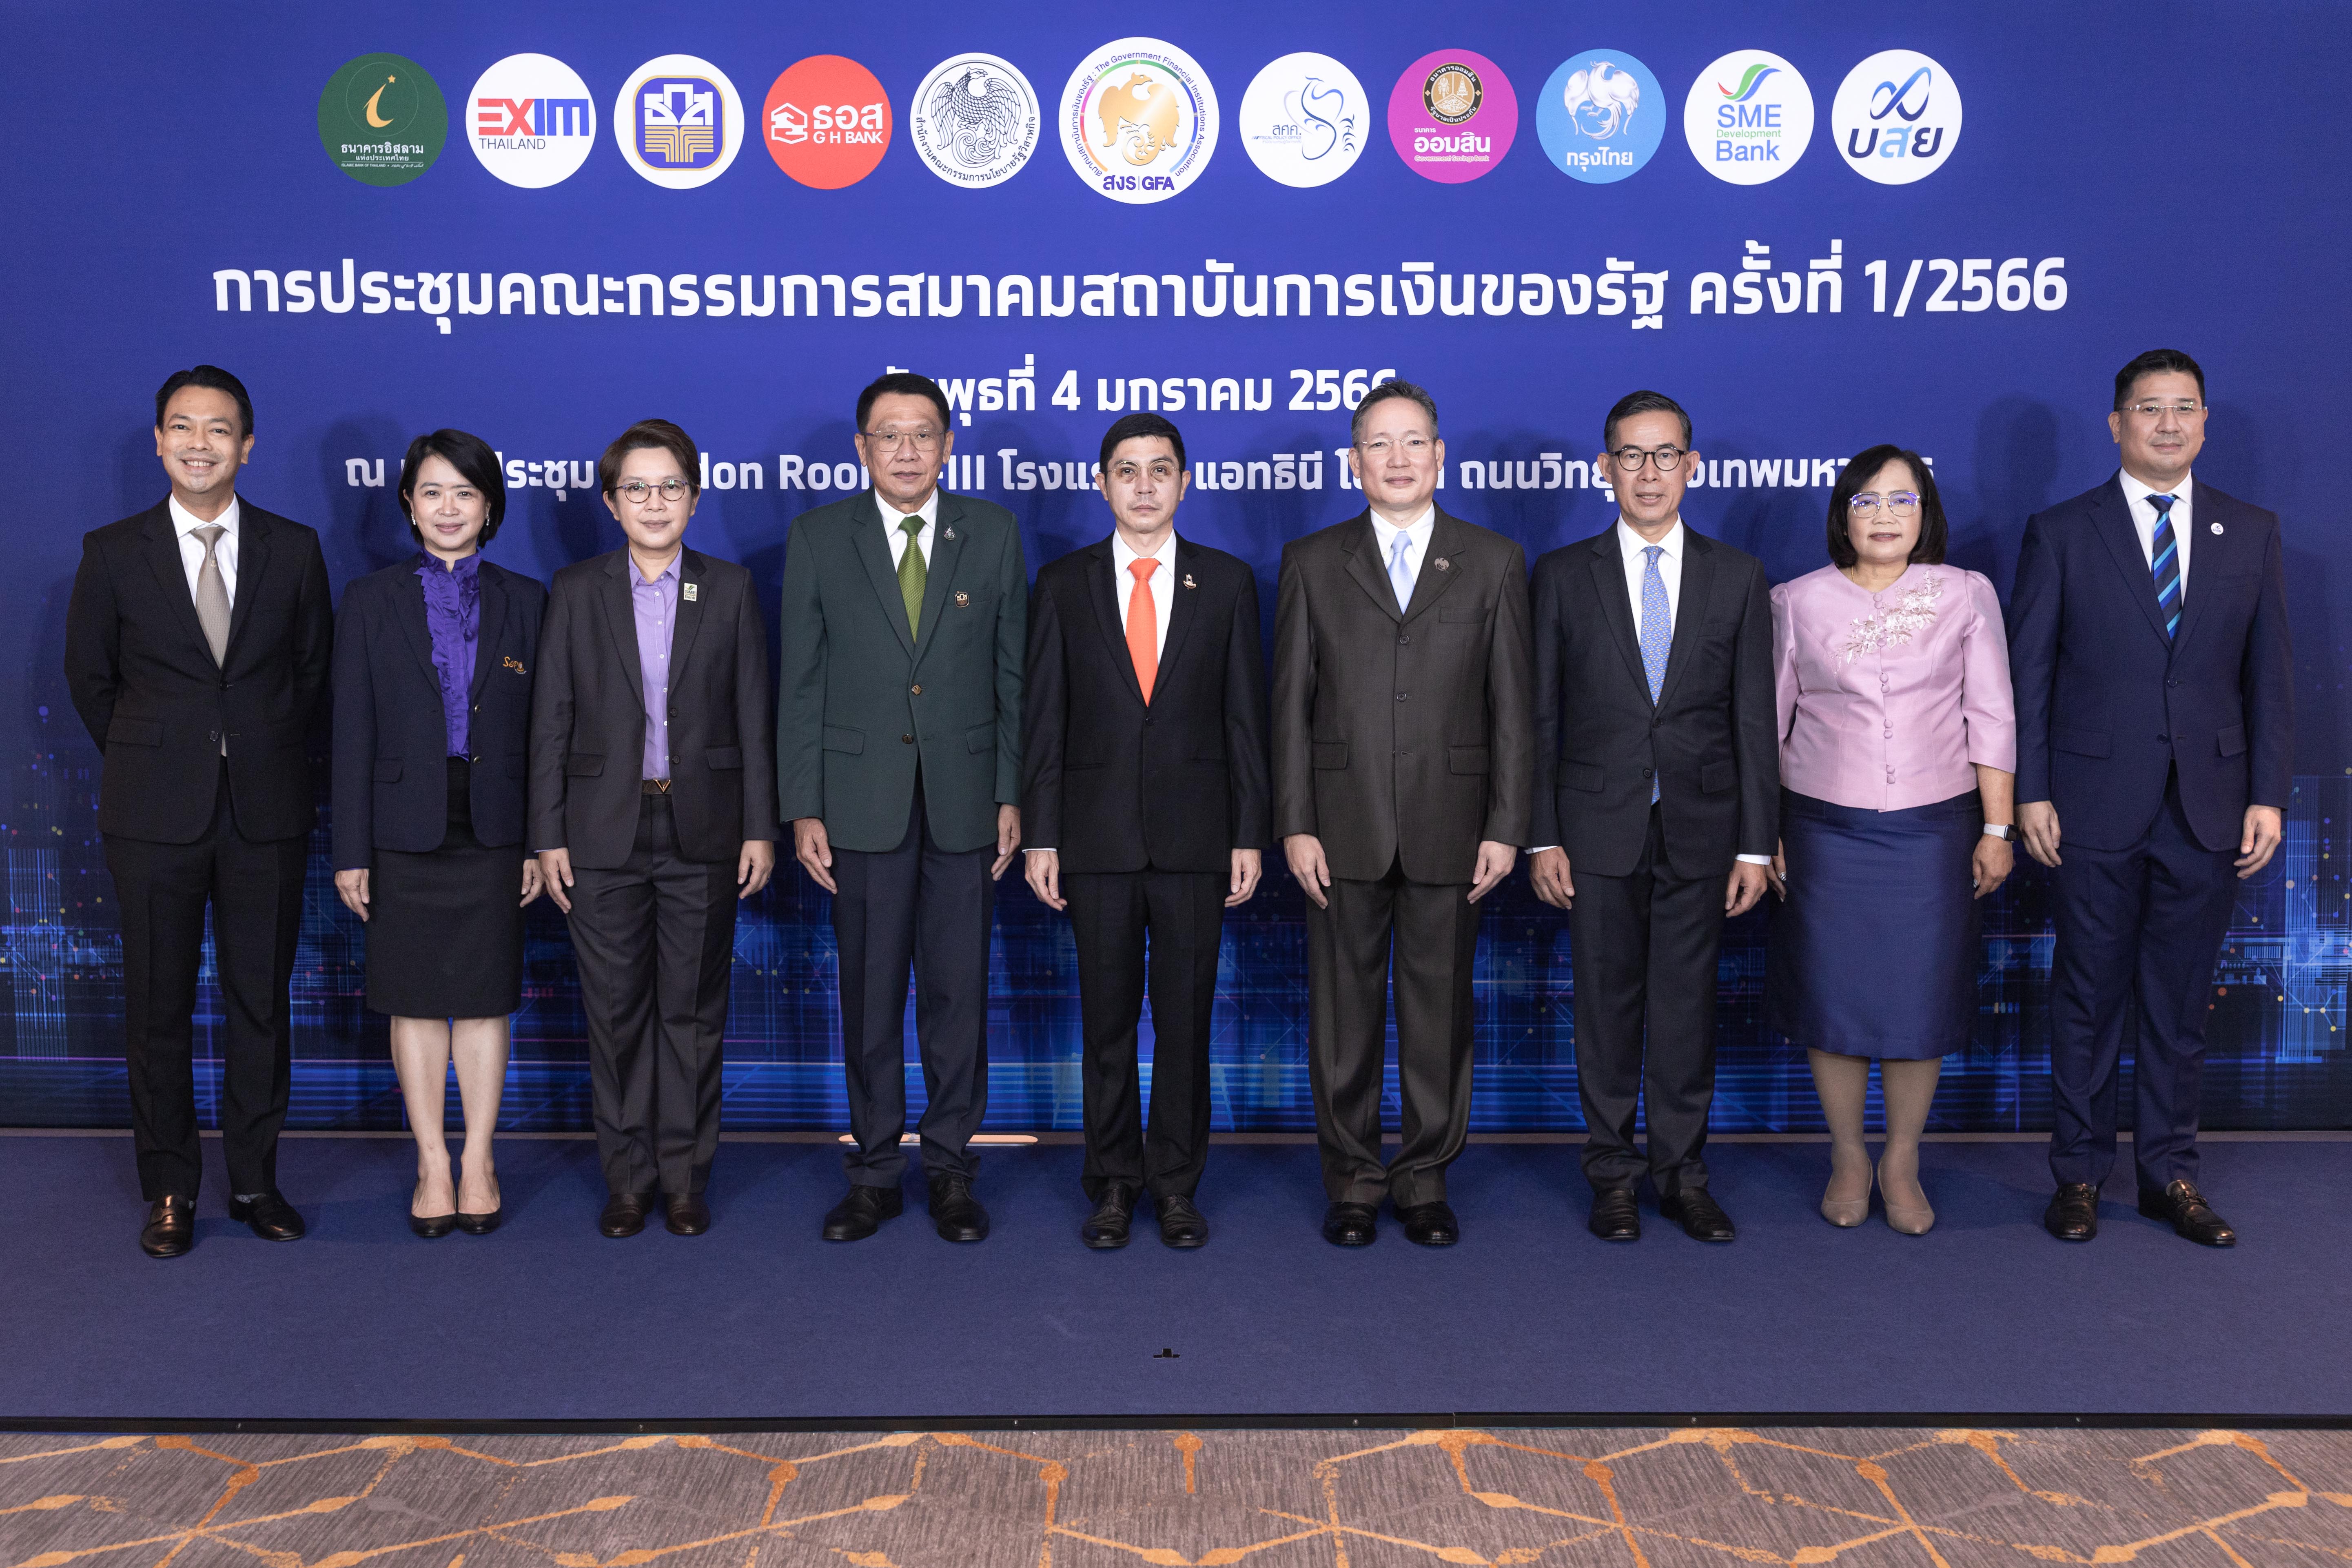 EXIM Thailand Joins the 1st Meeting of Government Financial Institutions Association in 2023